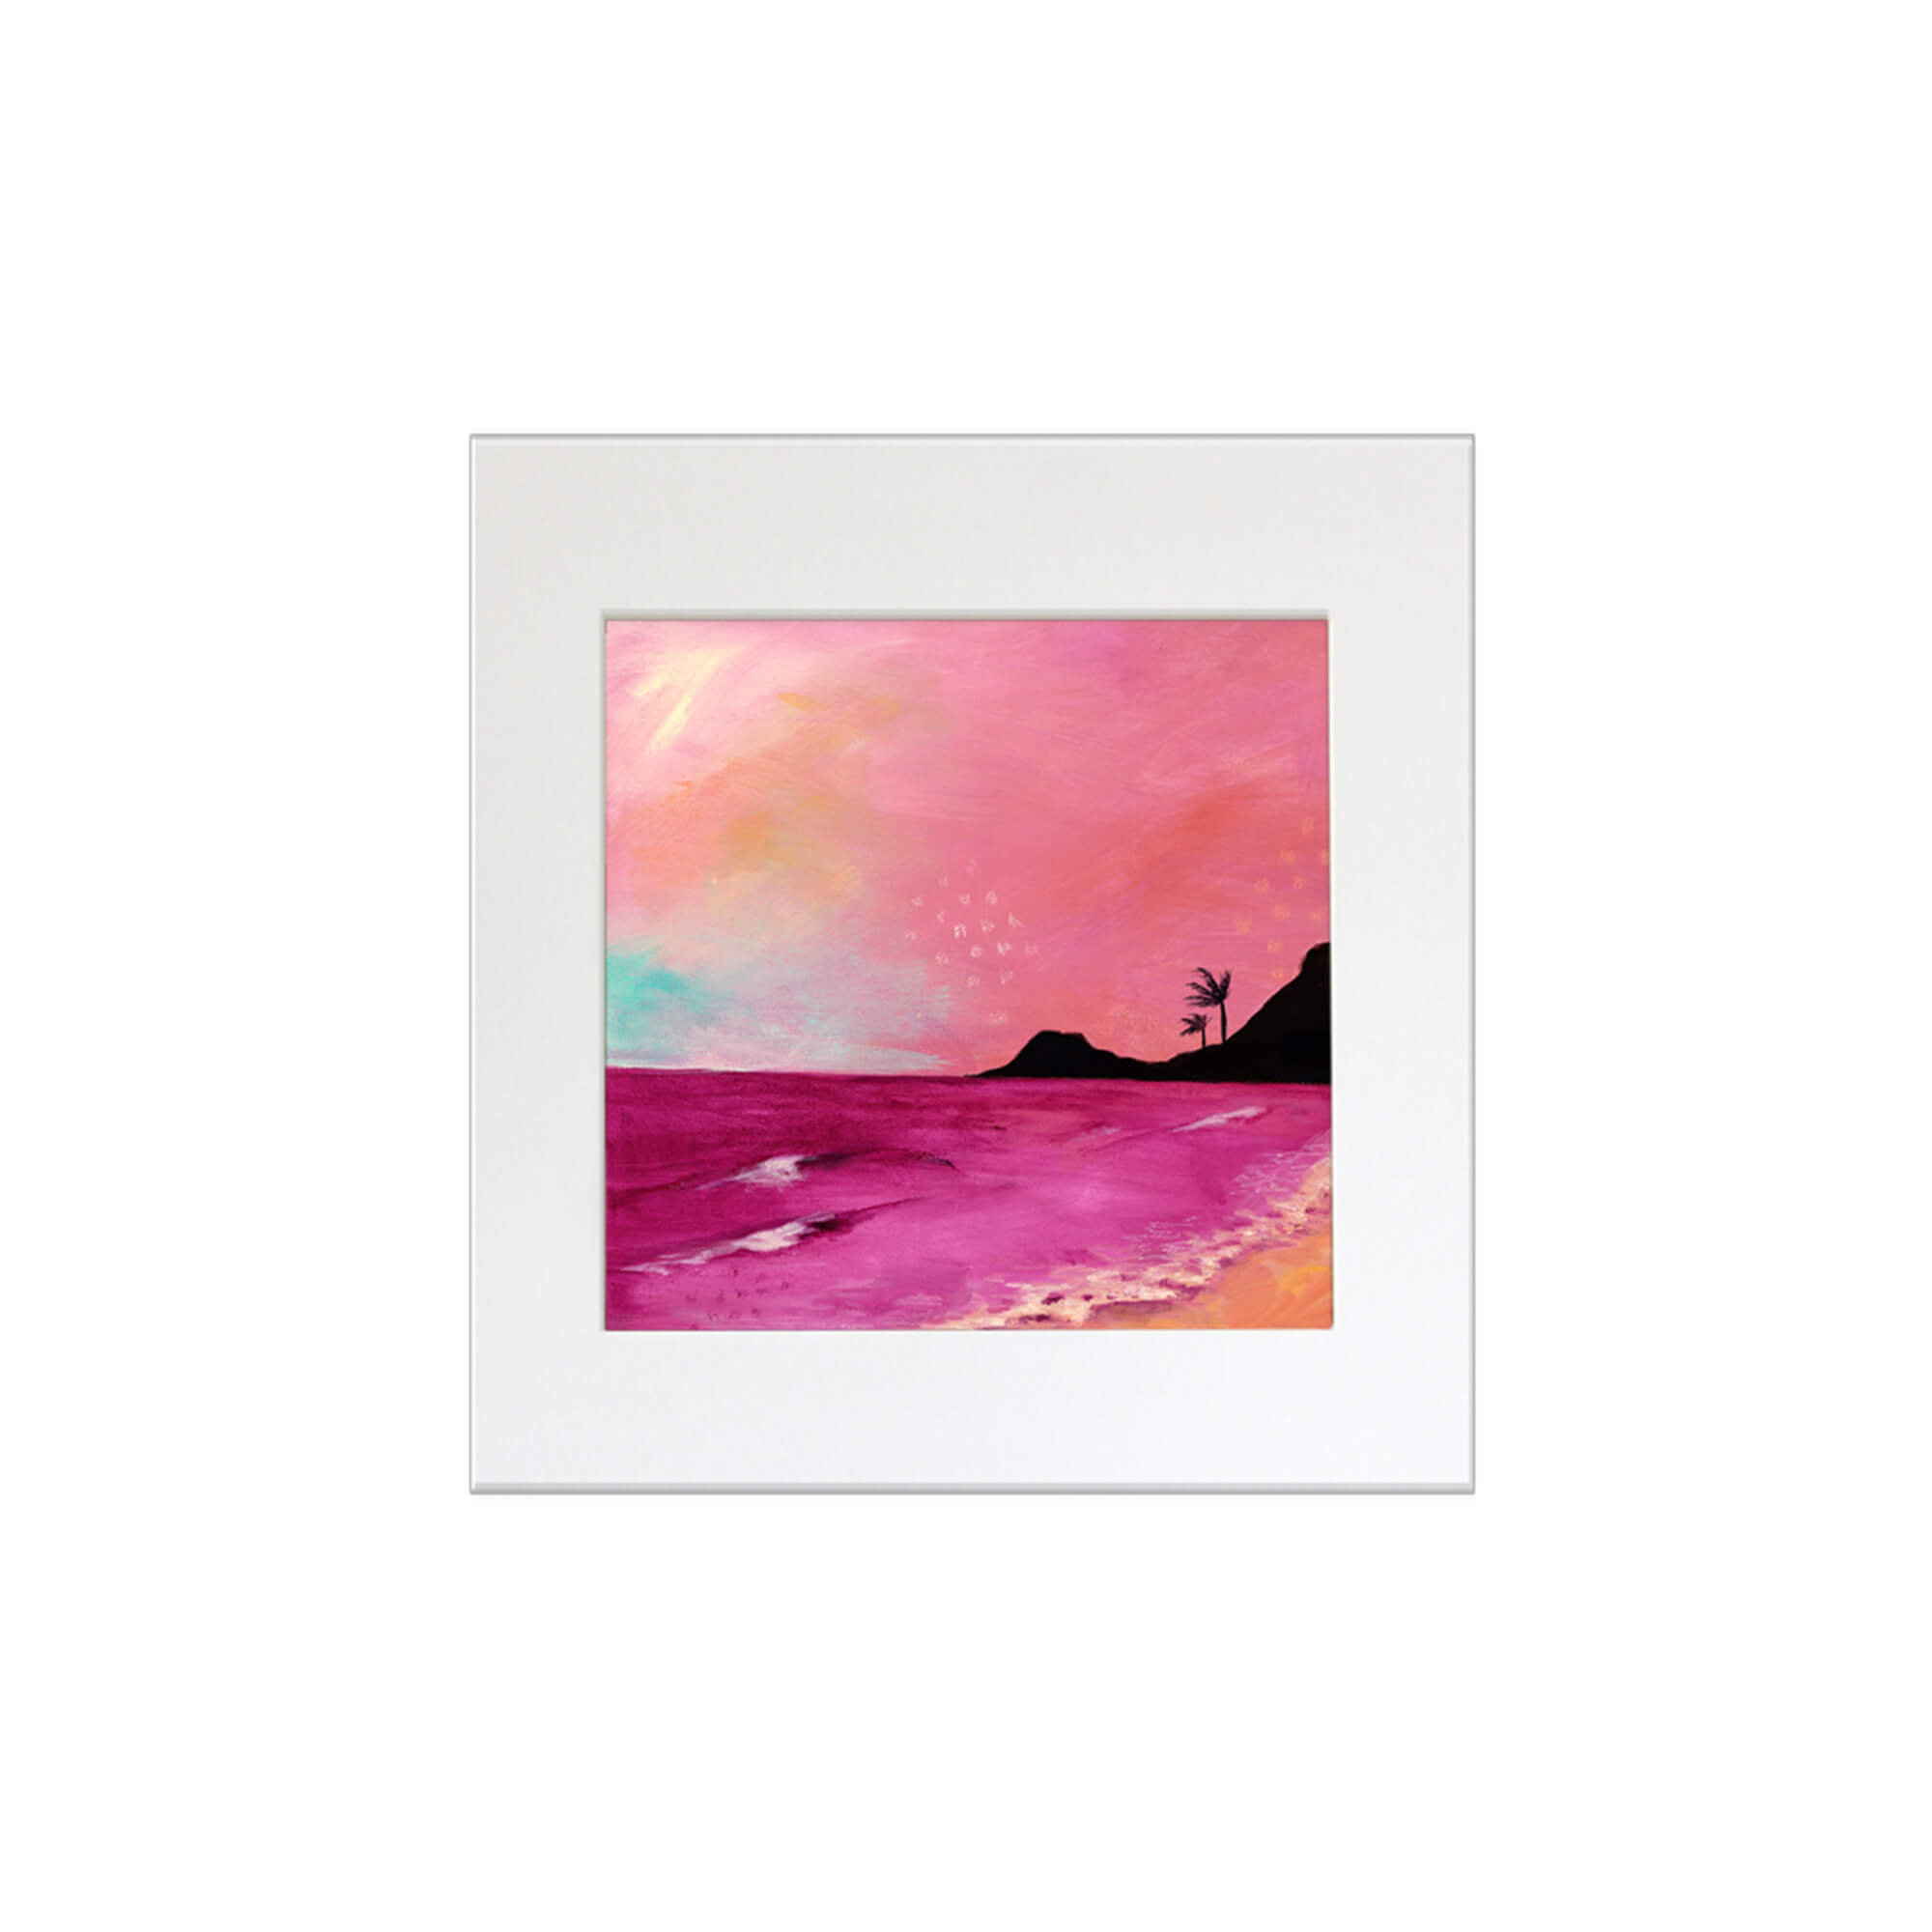 A pink seascape with a touch of blue by Hawaii artist Lindsay Wilkins